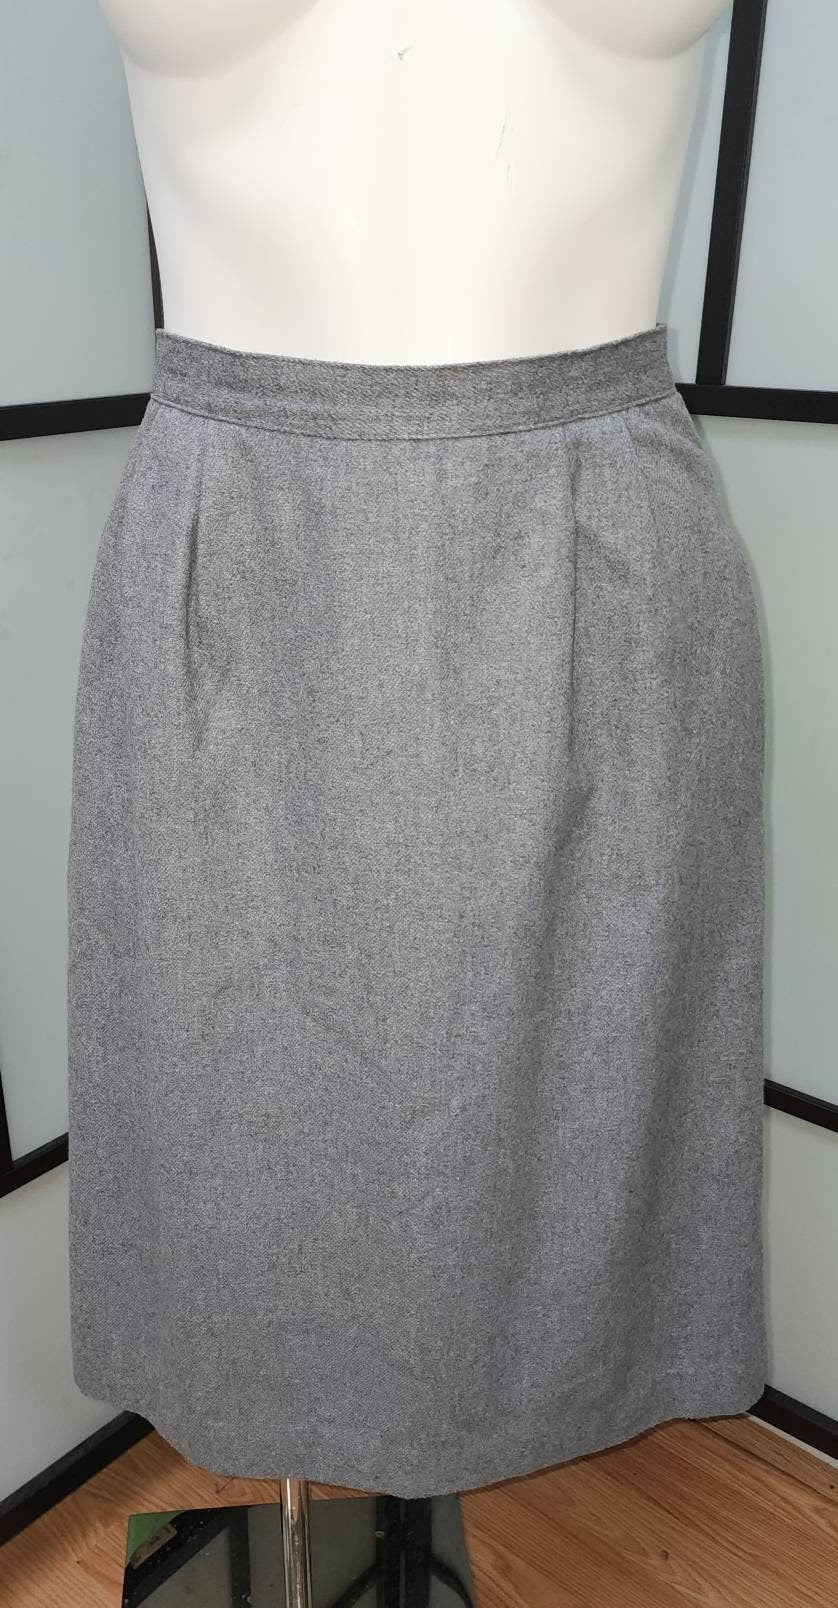 Vintage Wool Skirt 1970s Classic Gray Wool 50s Style Pencil Skirt Mid Century Rockabilly M